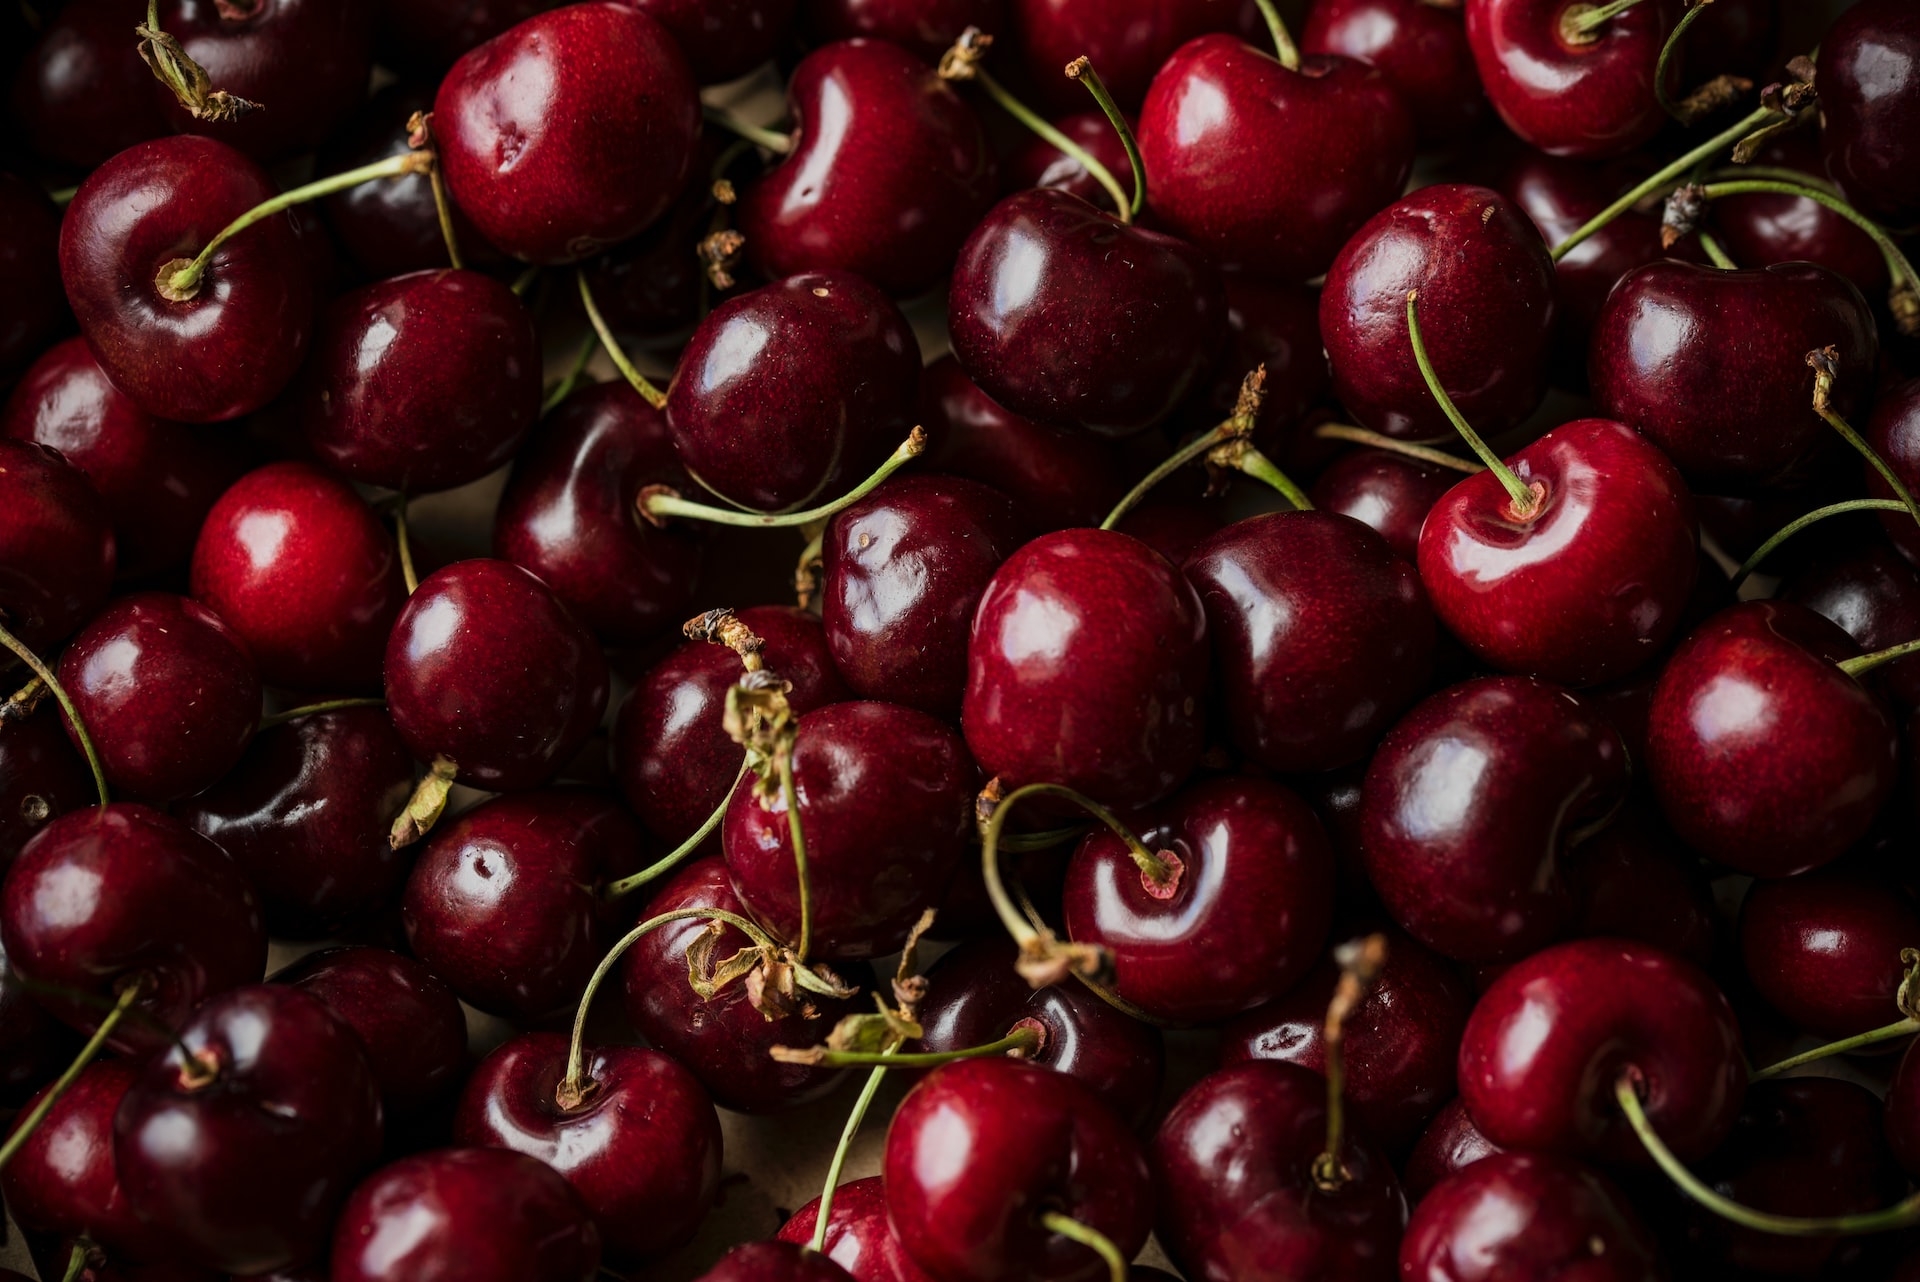 Cherries: A Delicious and Nutritious Fruit for Your Health